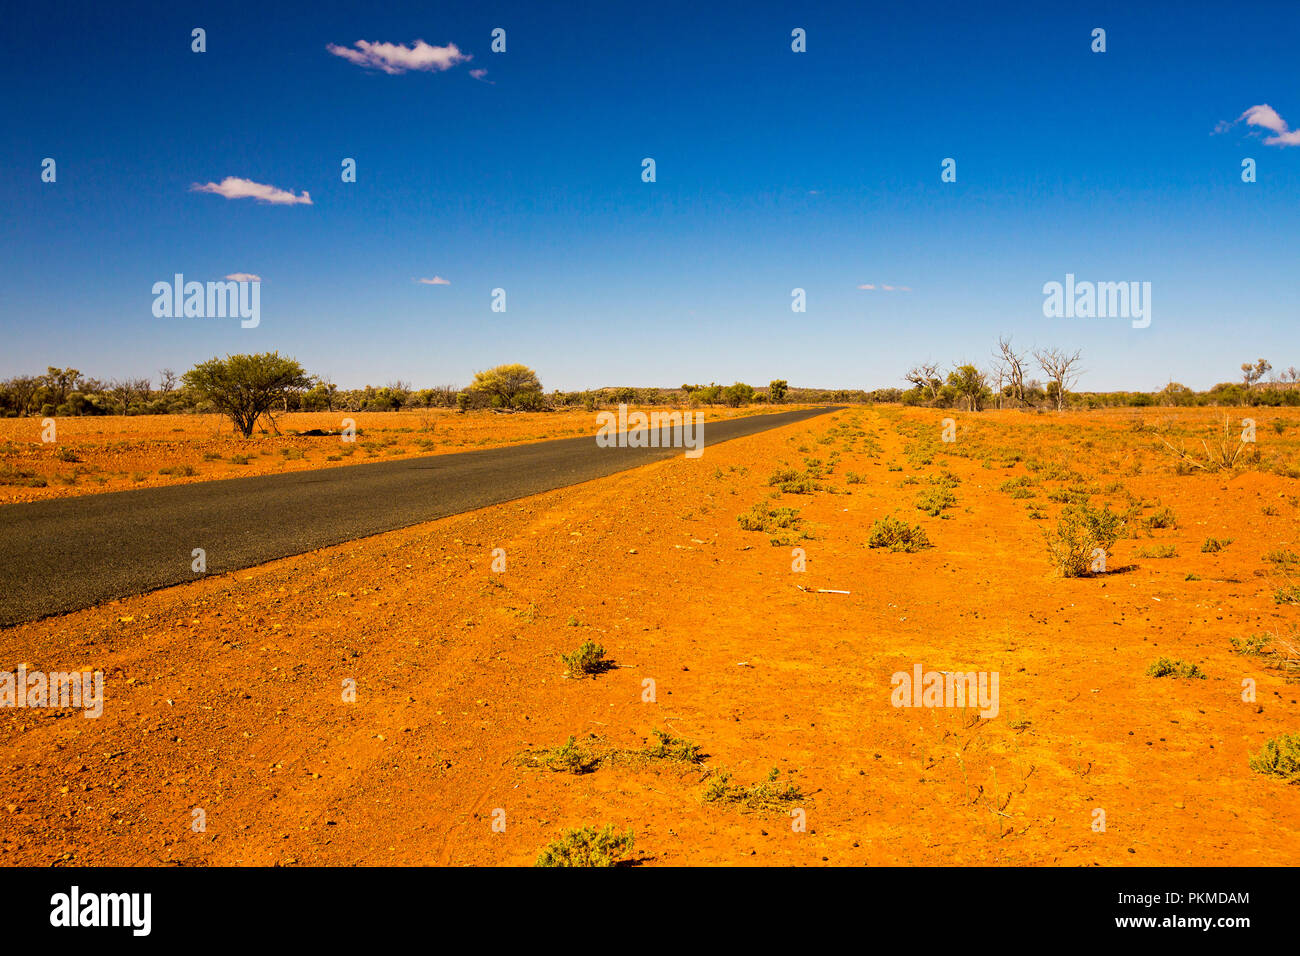 Narrow Australian outback road slicing through arid landscape with sparse  vegetation during drought & stretching to distant horizon under blue sky Stock Photo